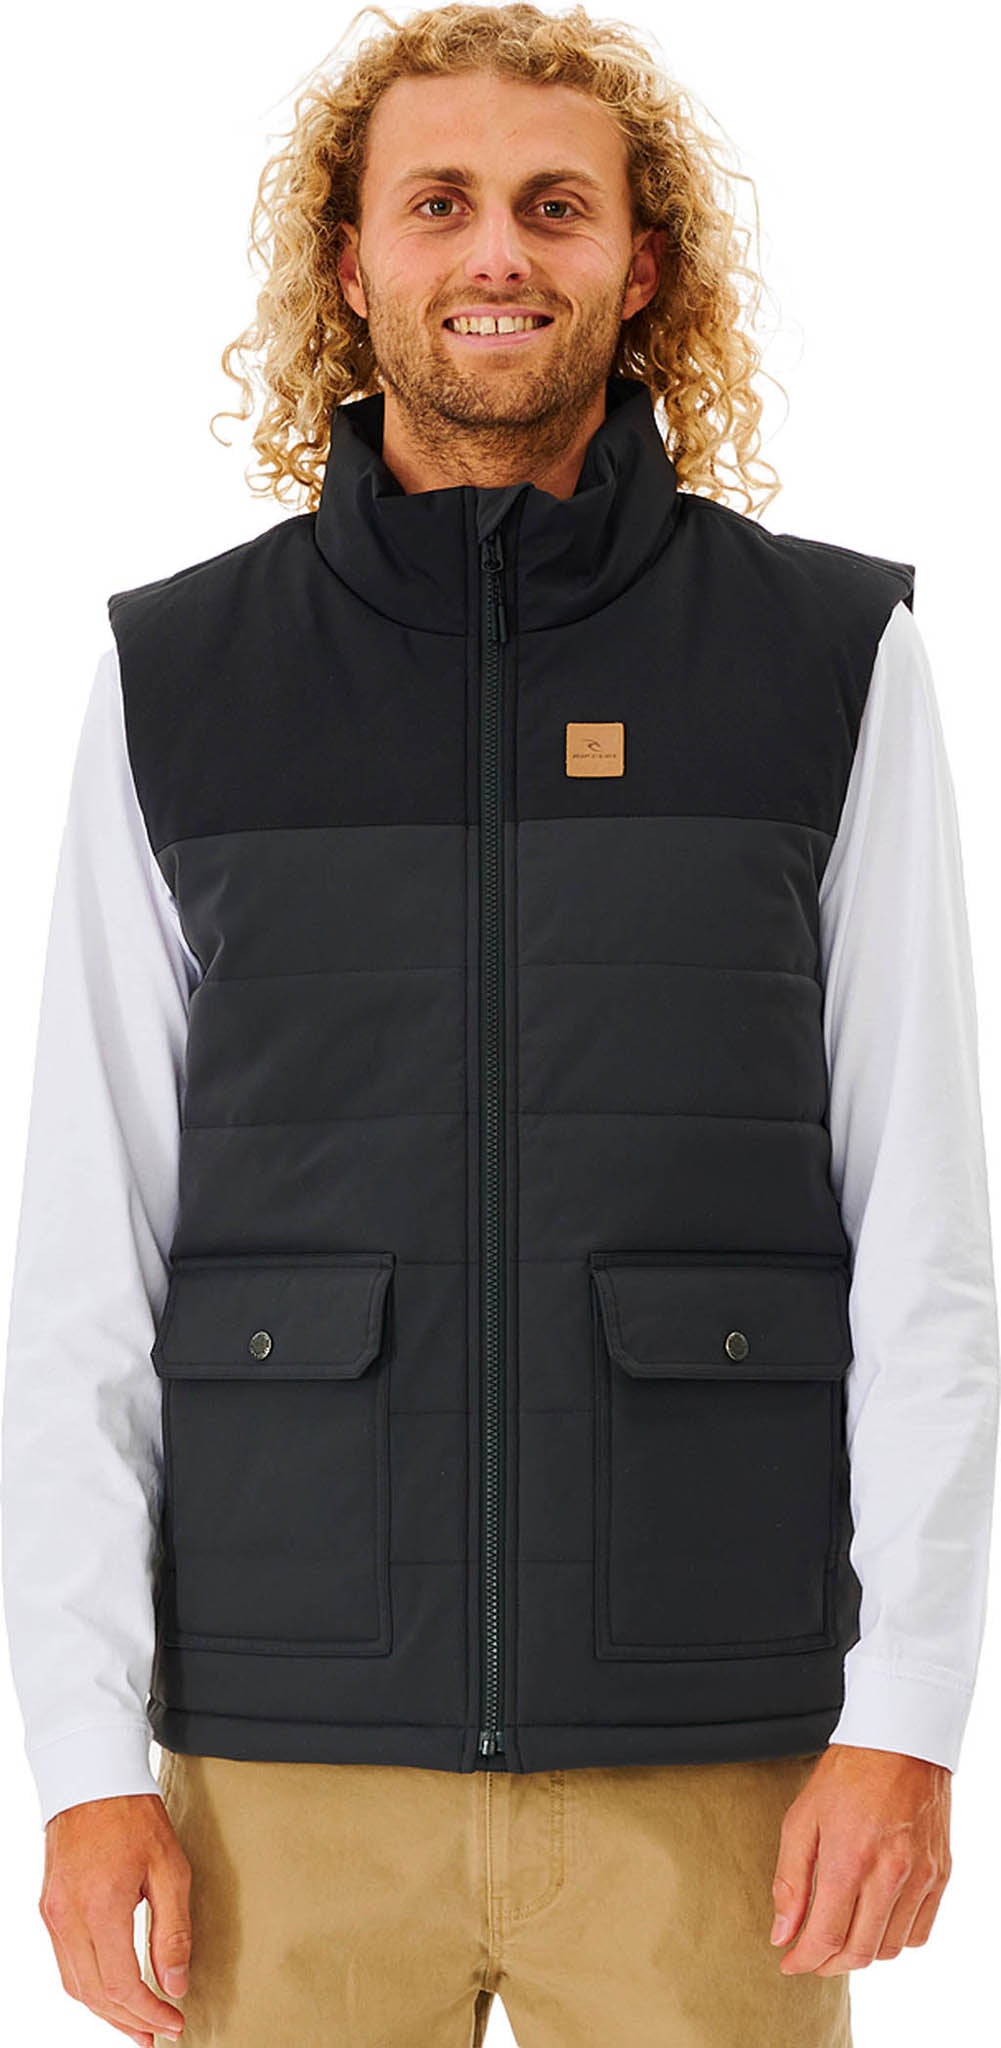 gilet rip curl homme